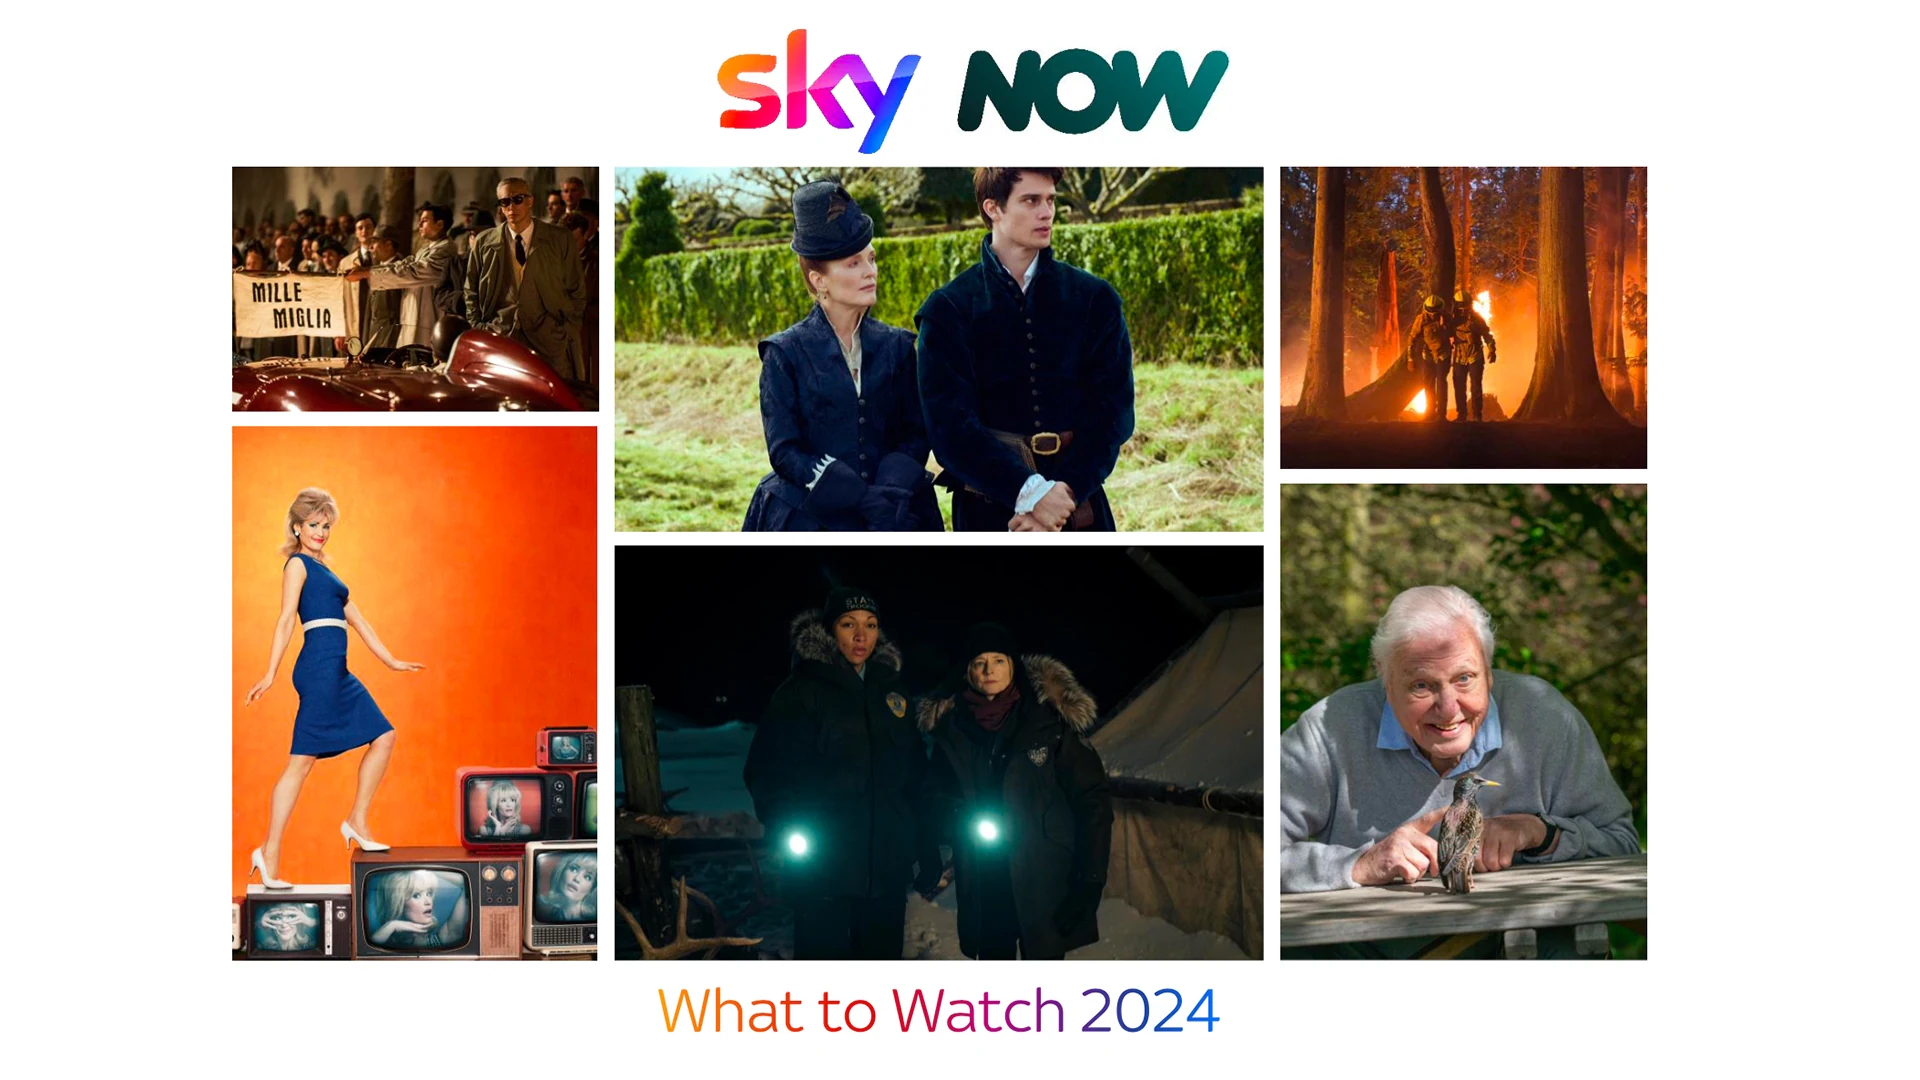 Sky & NOW What to Watch 2024 News on News